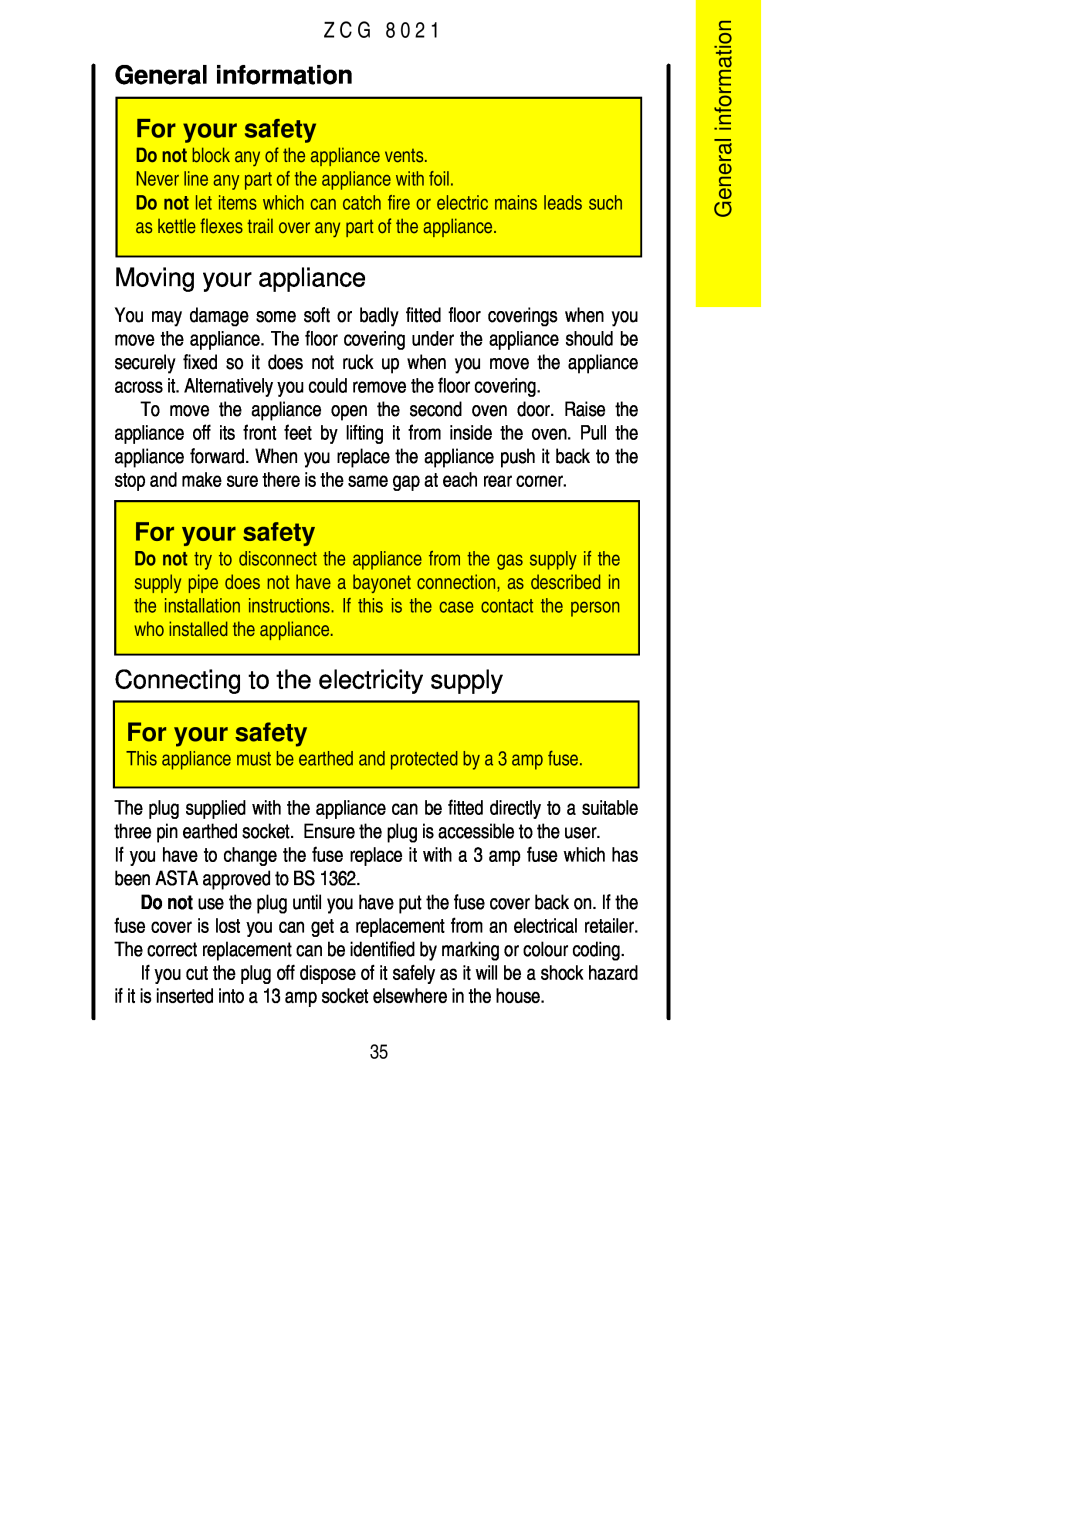 Zanussi ZCG 8021 manual General information For your safety, Moving your appliance, Connecting to the electricity supply 